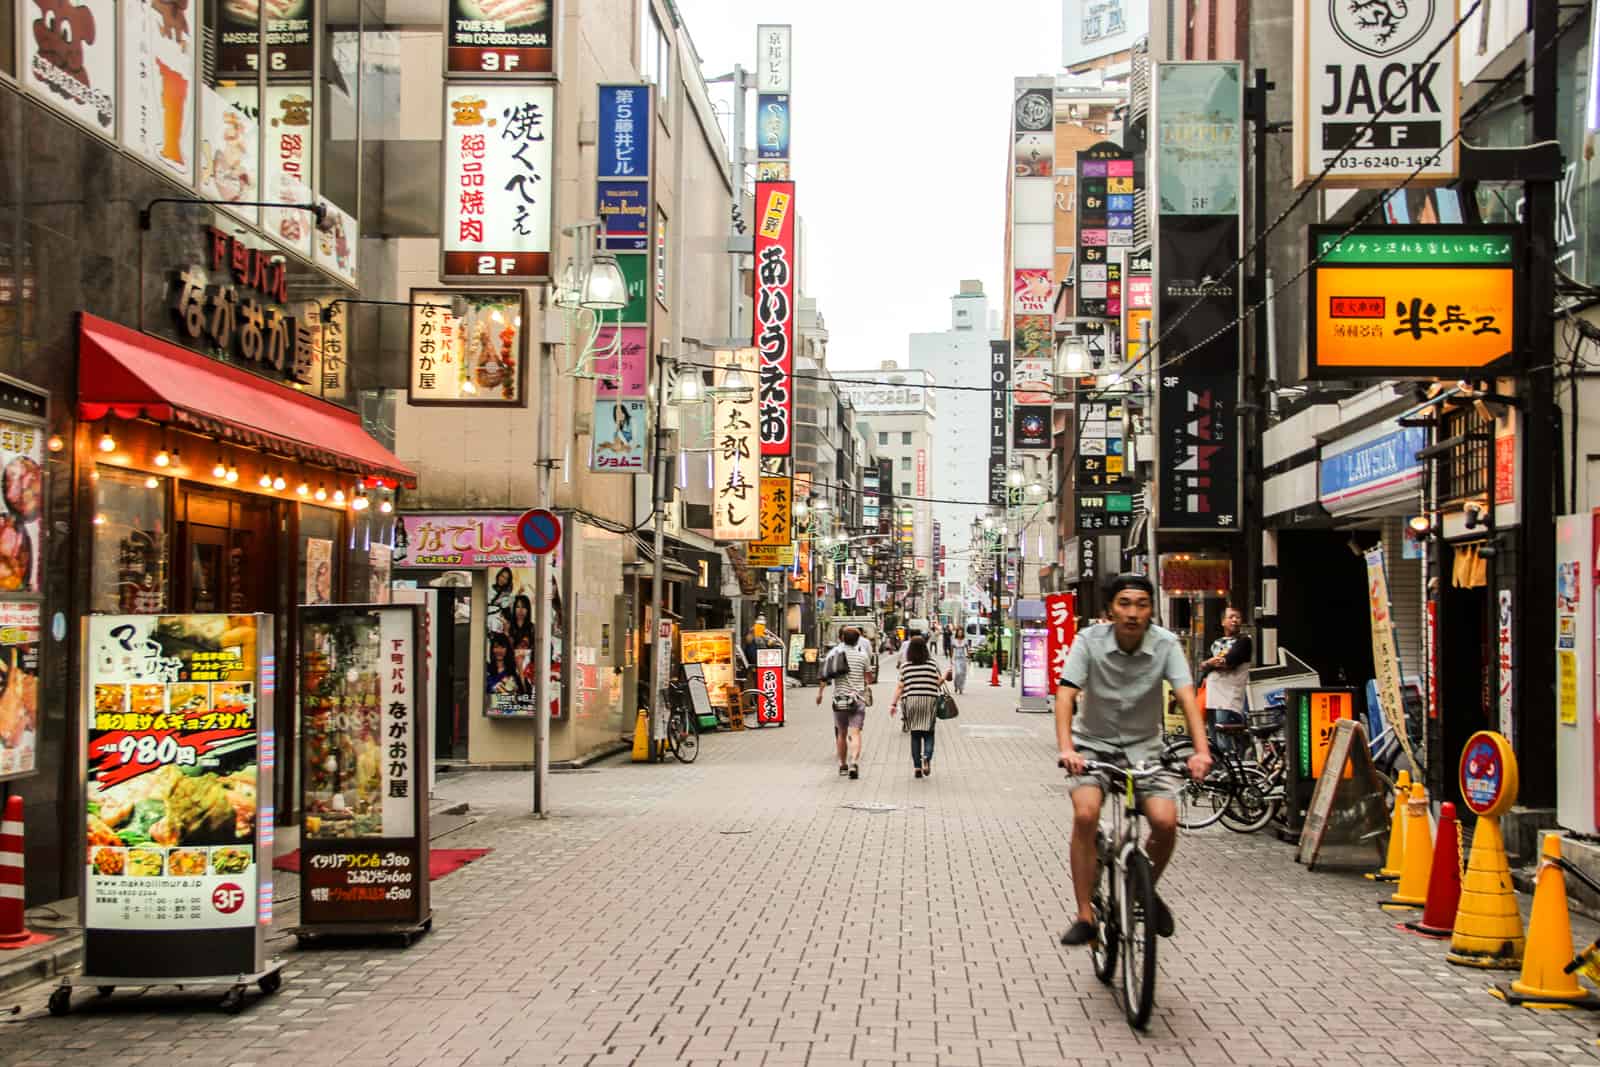 A man cycles down a street in Japan with neon lights and advertising. 